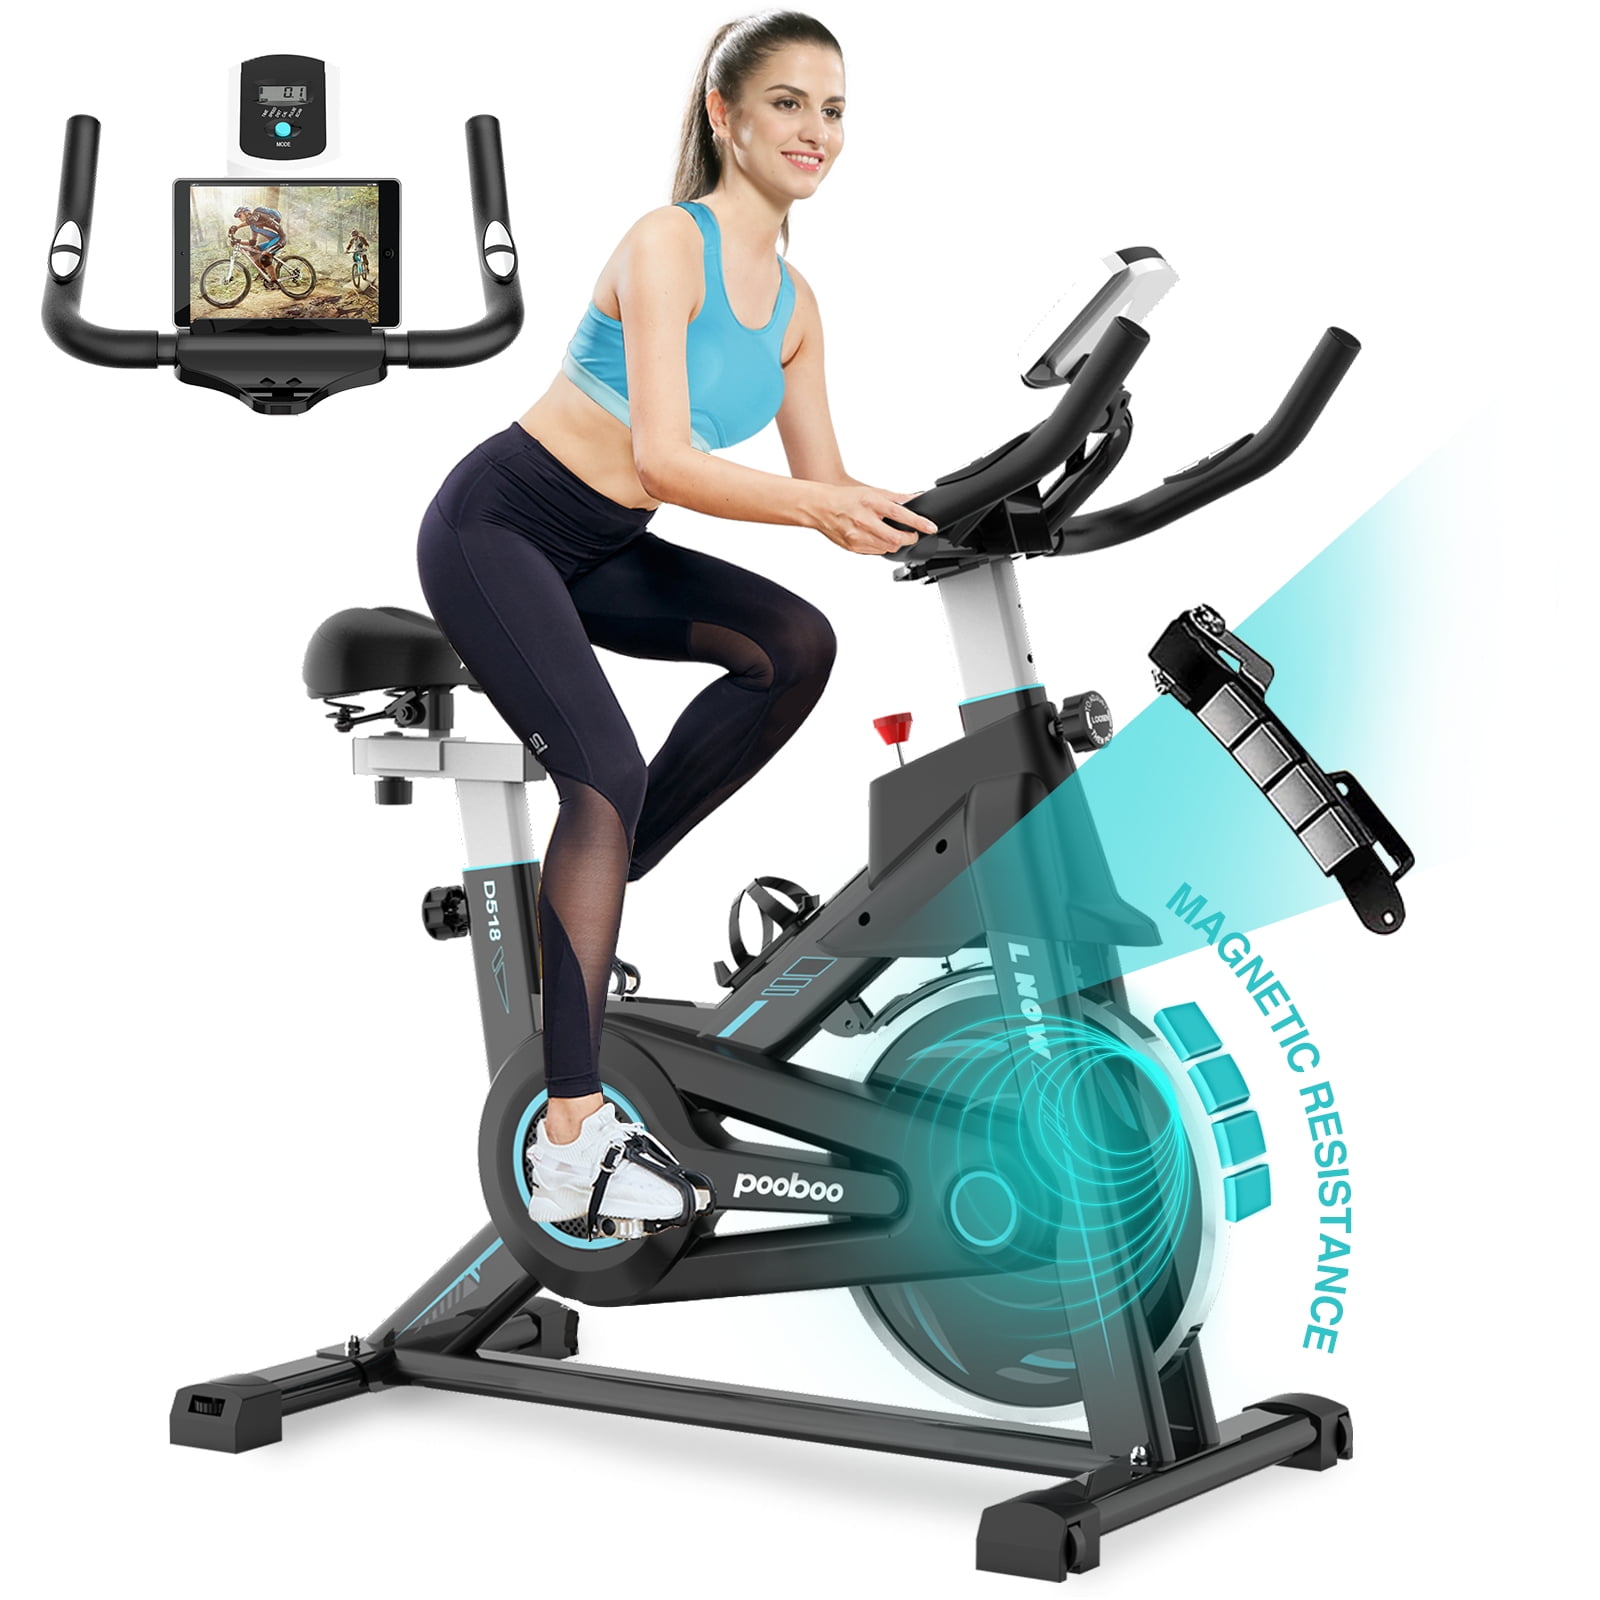 Bicycle Cycling Fitness Stationary Exercise Bike Cardio Home Workout Indoor Hot 